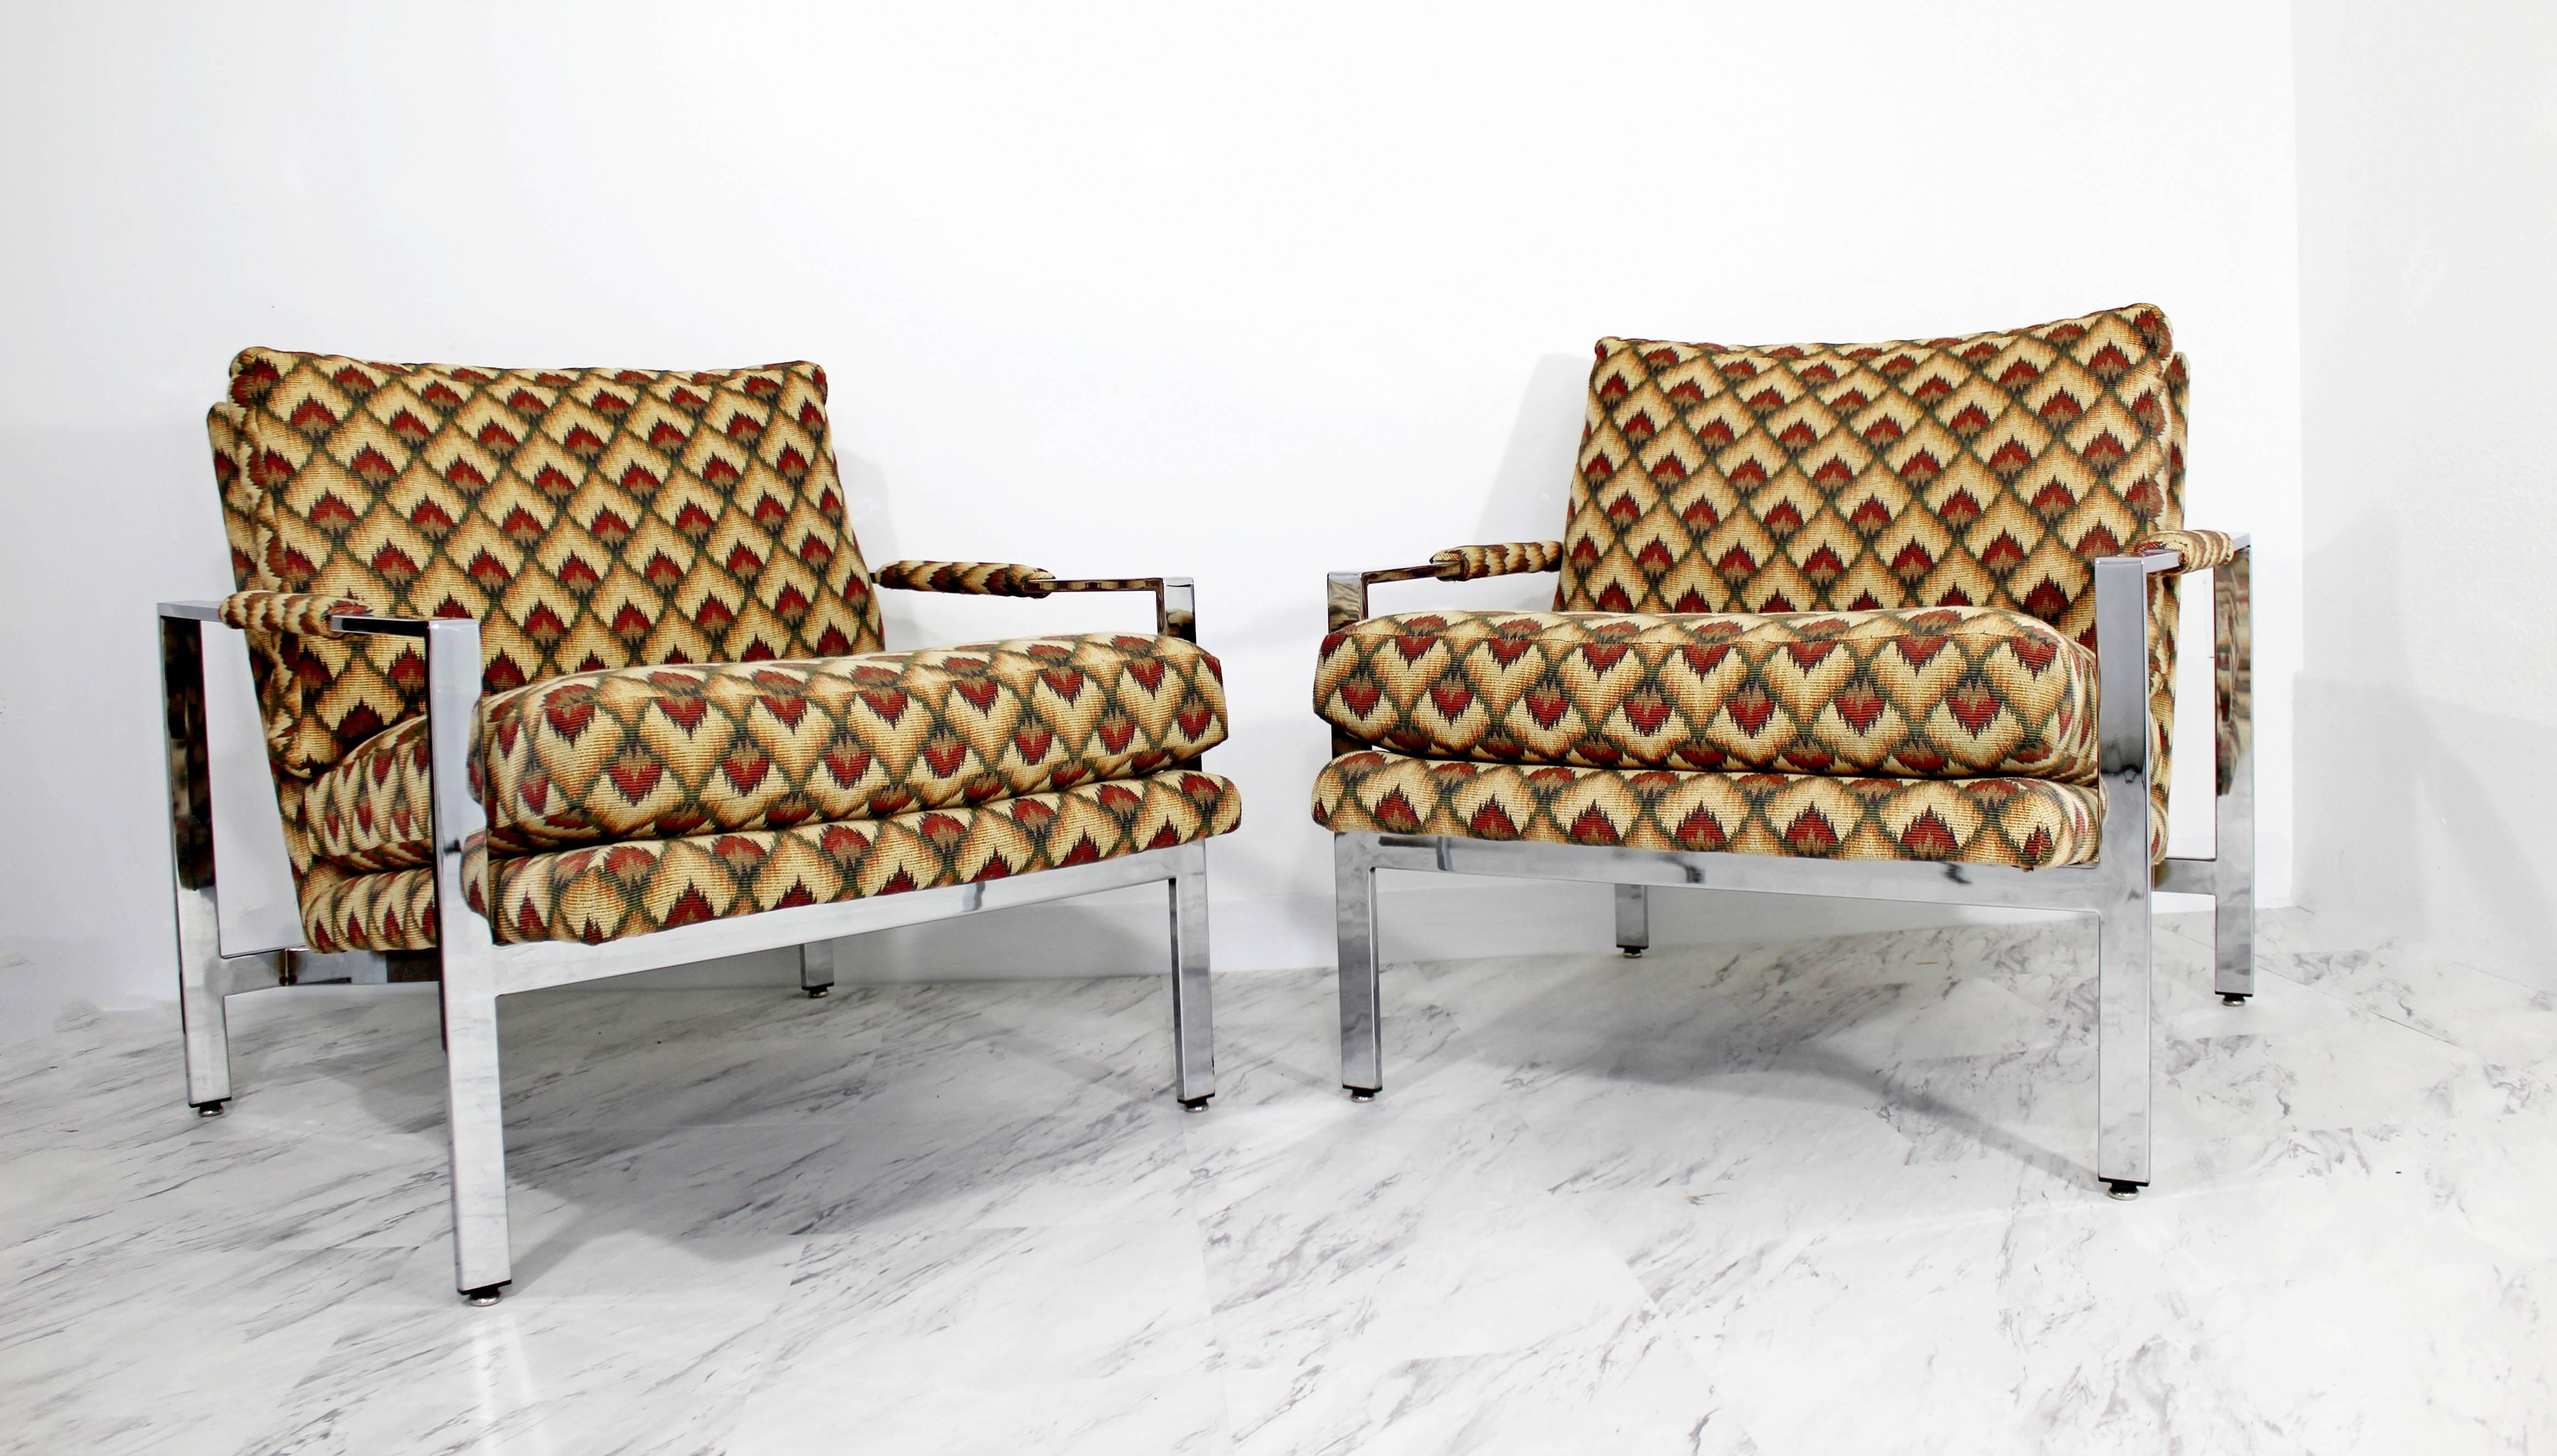 For your consideration is a fabulous pair of lounge chairs by Milo Baughman. The chairs are In excellent condition. The dimensions are 28.5